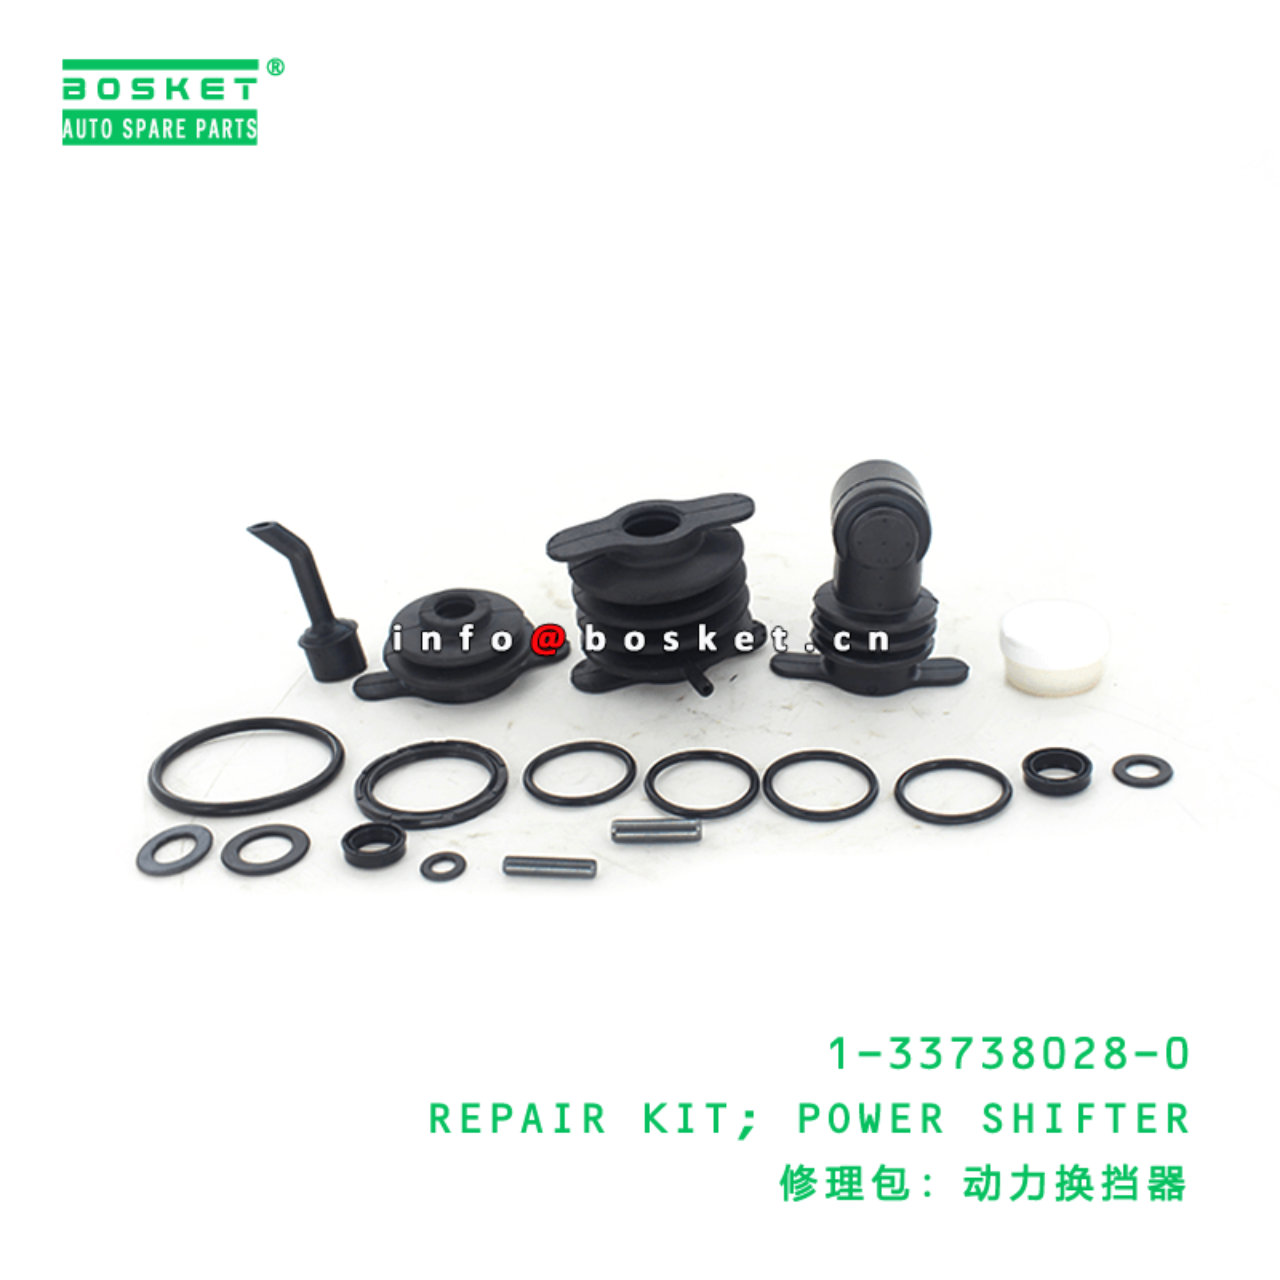 1-33738028-0 Power Shifter Repair Kit 1337380280 Suitable for 